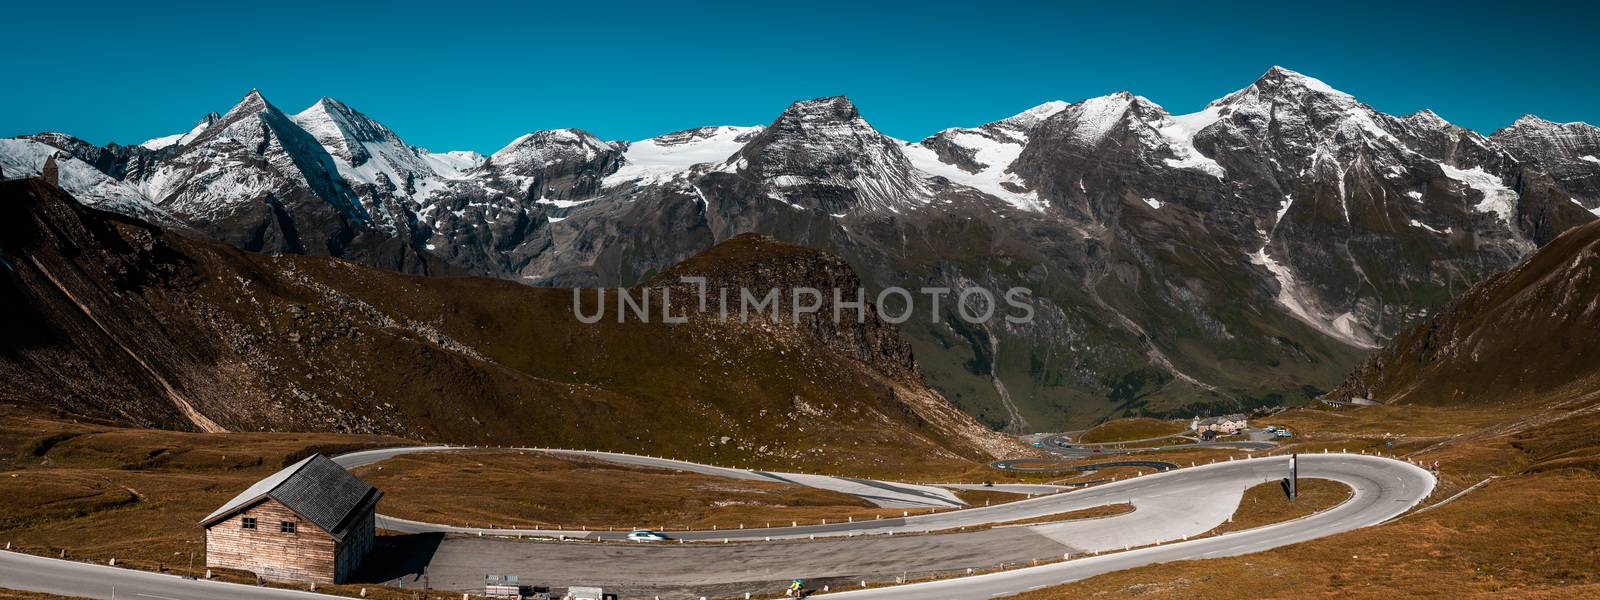 Grossglockner High Alpine Road in Austria Alps. Wide Stitched Pa by merc67